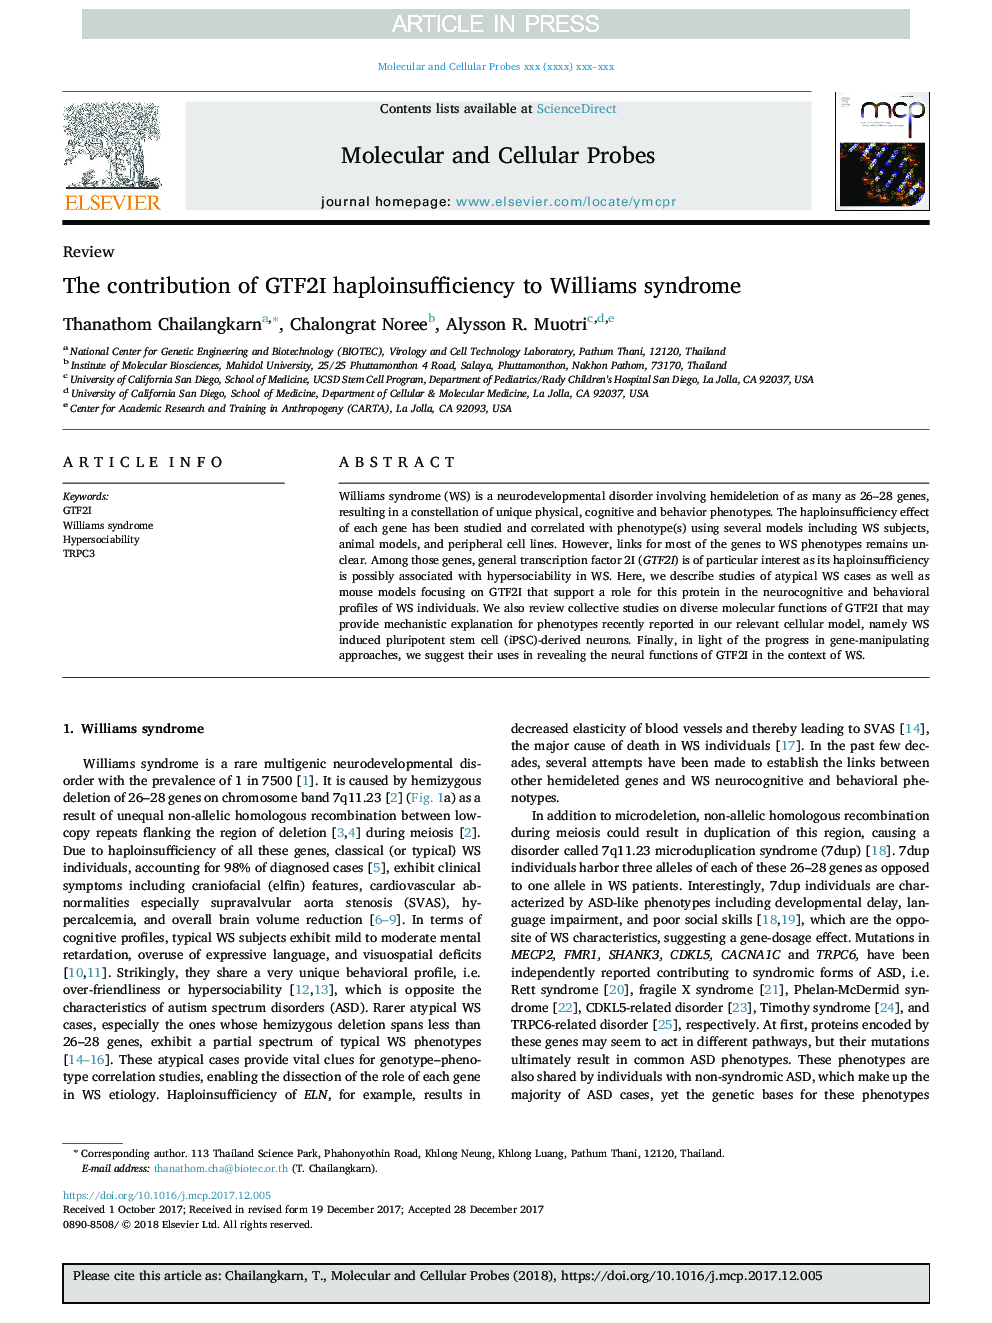 The contribution of GTF2I haploinsufficiency to Williams syndrome